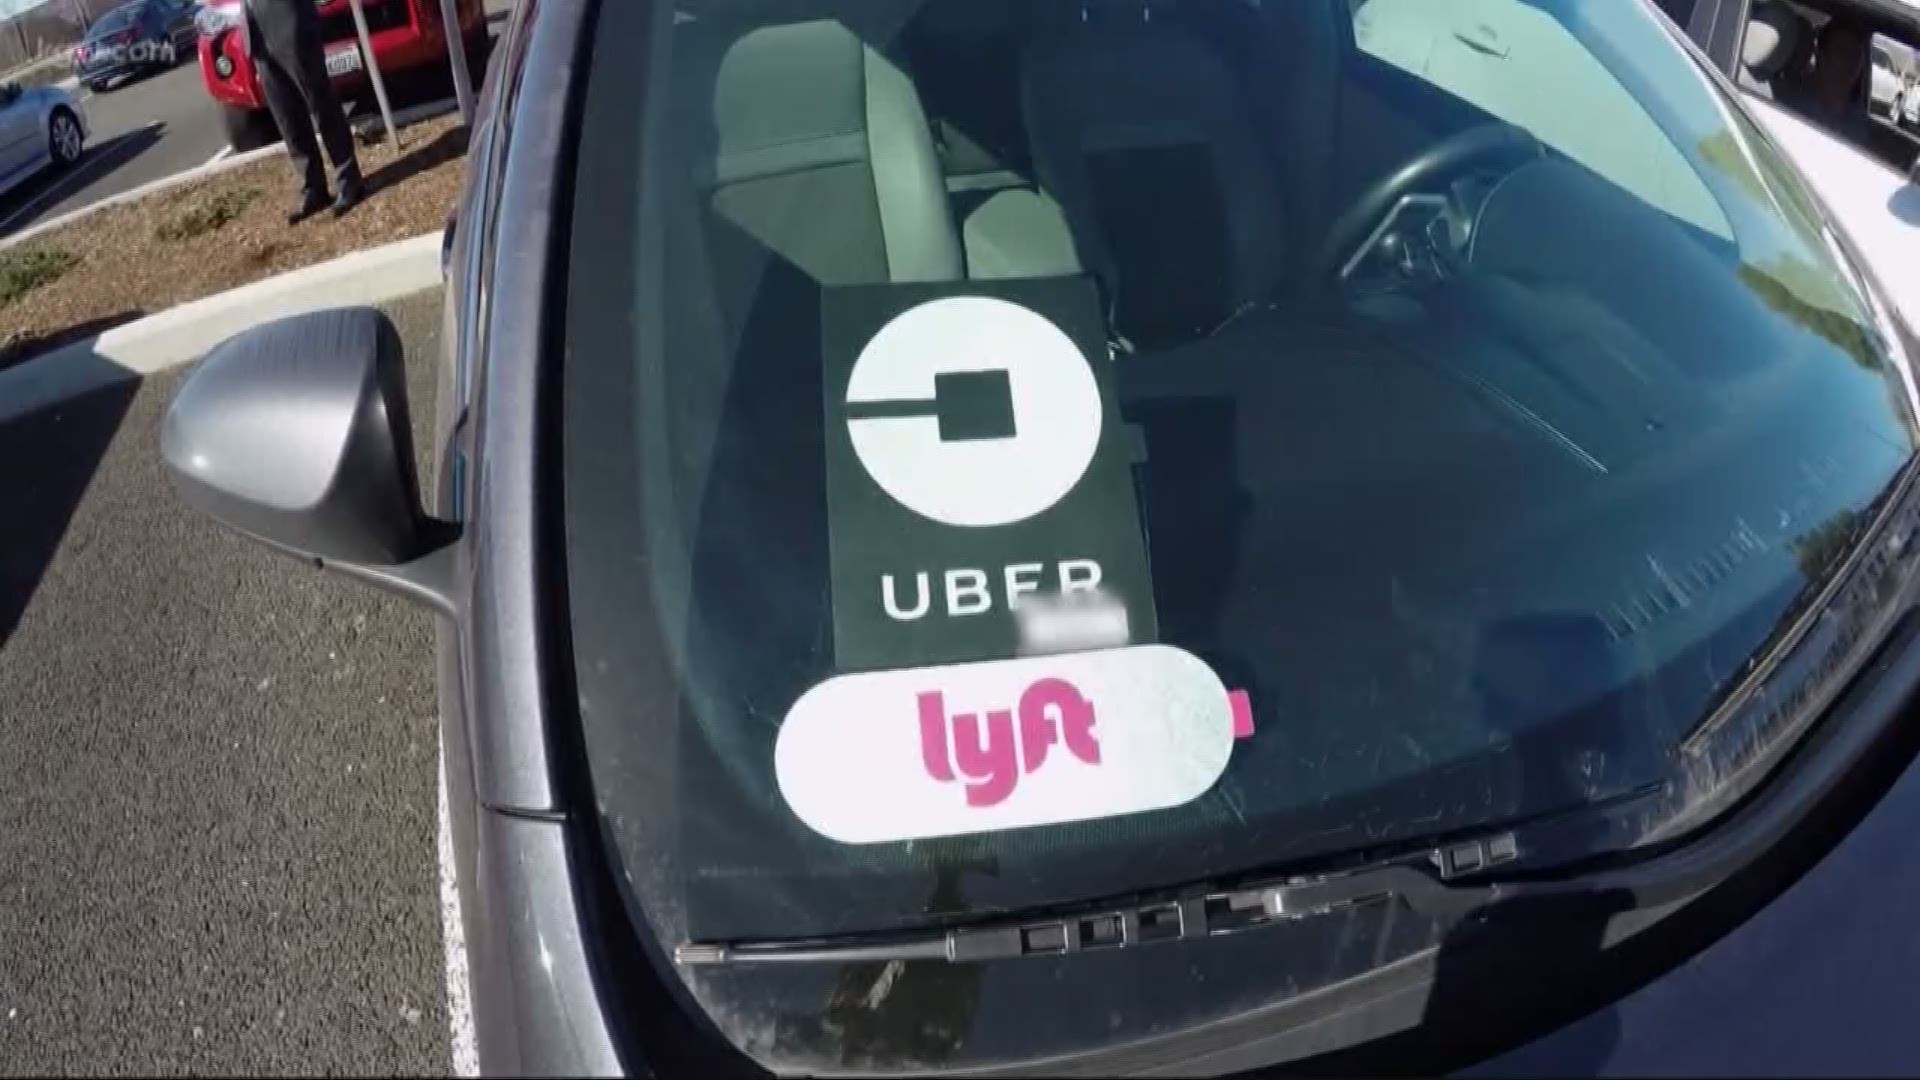 Dozens of Uber, Lyft drivers should have been rejected during background checks